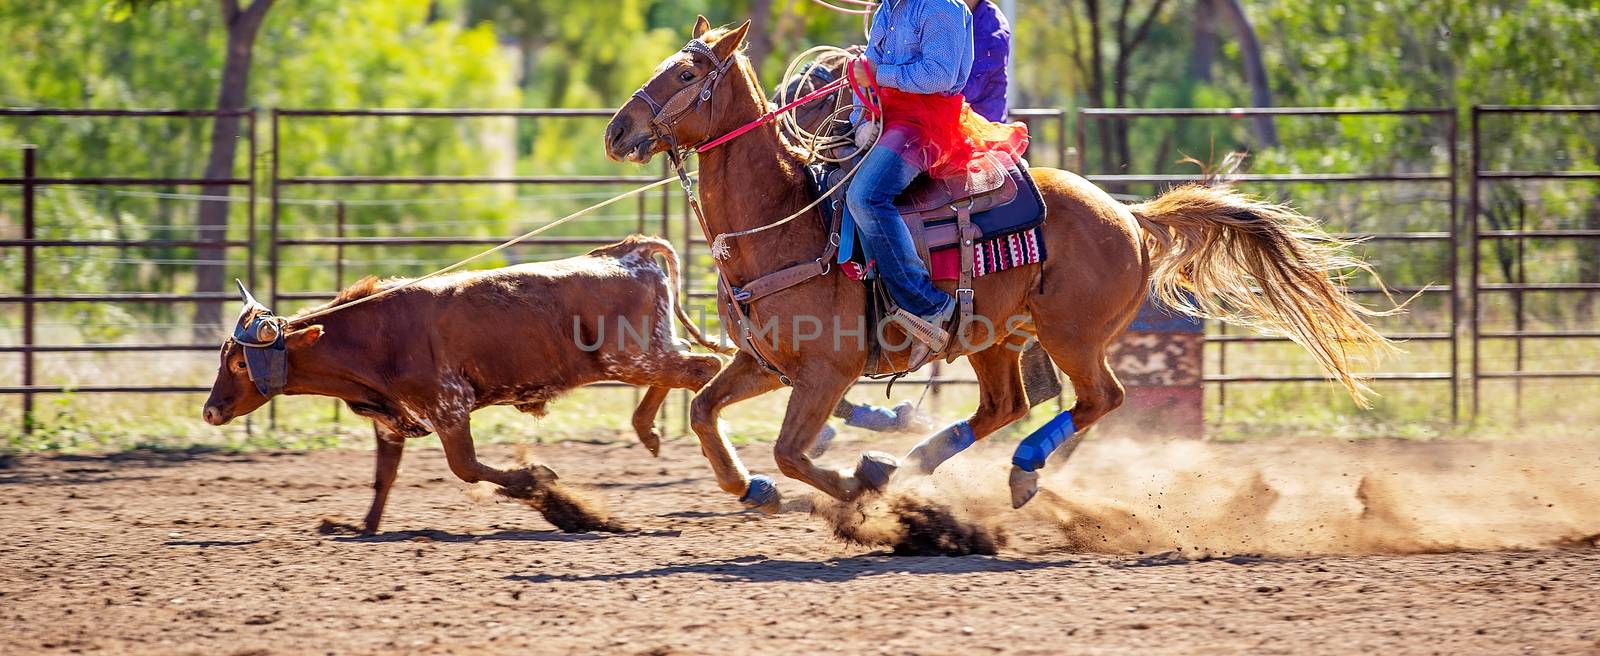 Australian Team Calf Roping At Country Rodeo by 	JacksonStock